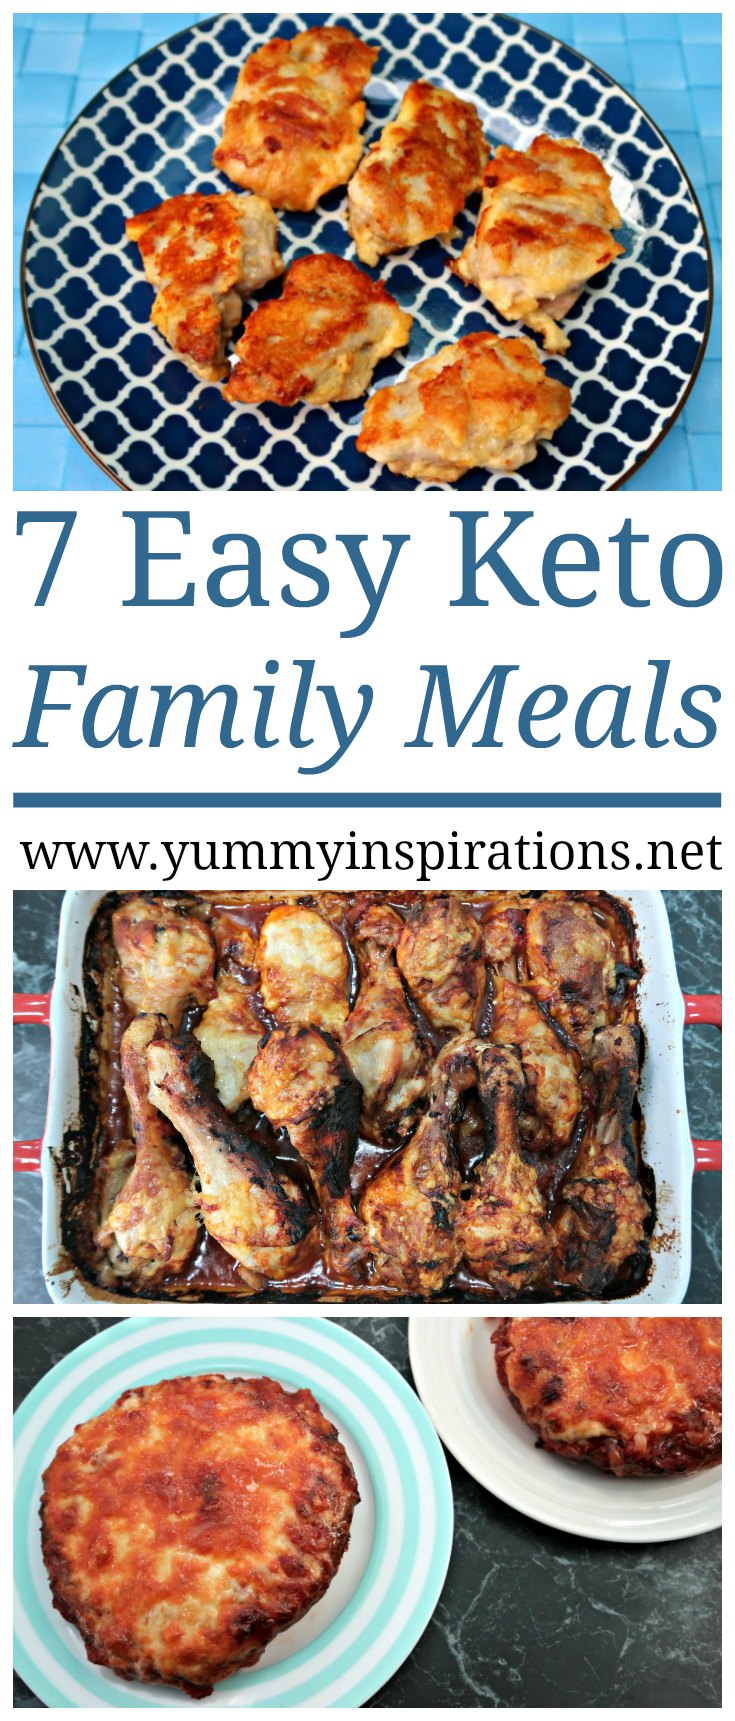 7 Keto Family Meals - How to follow the Ketogenic Diet ... - 735 x 1721 jpeg 317kB